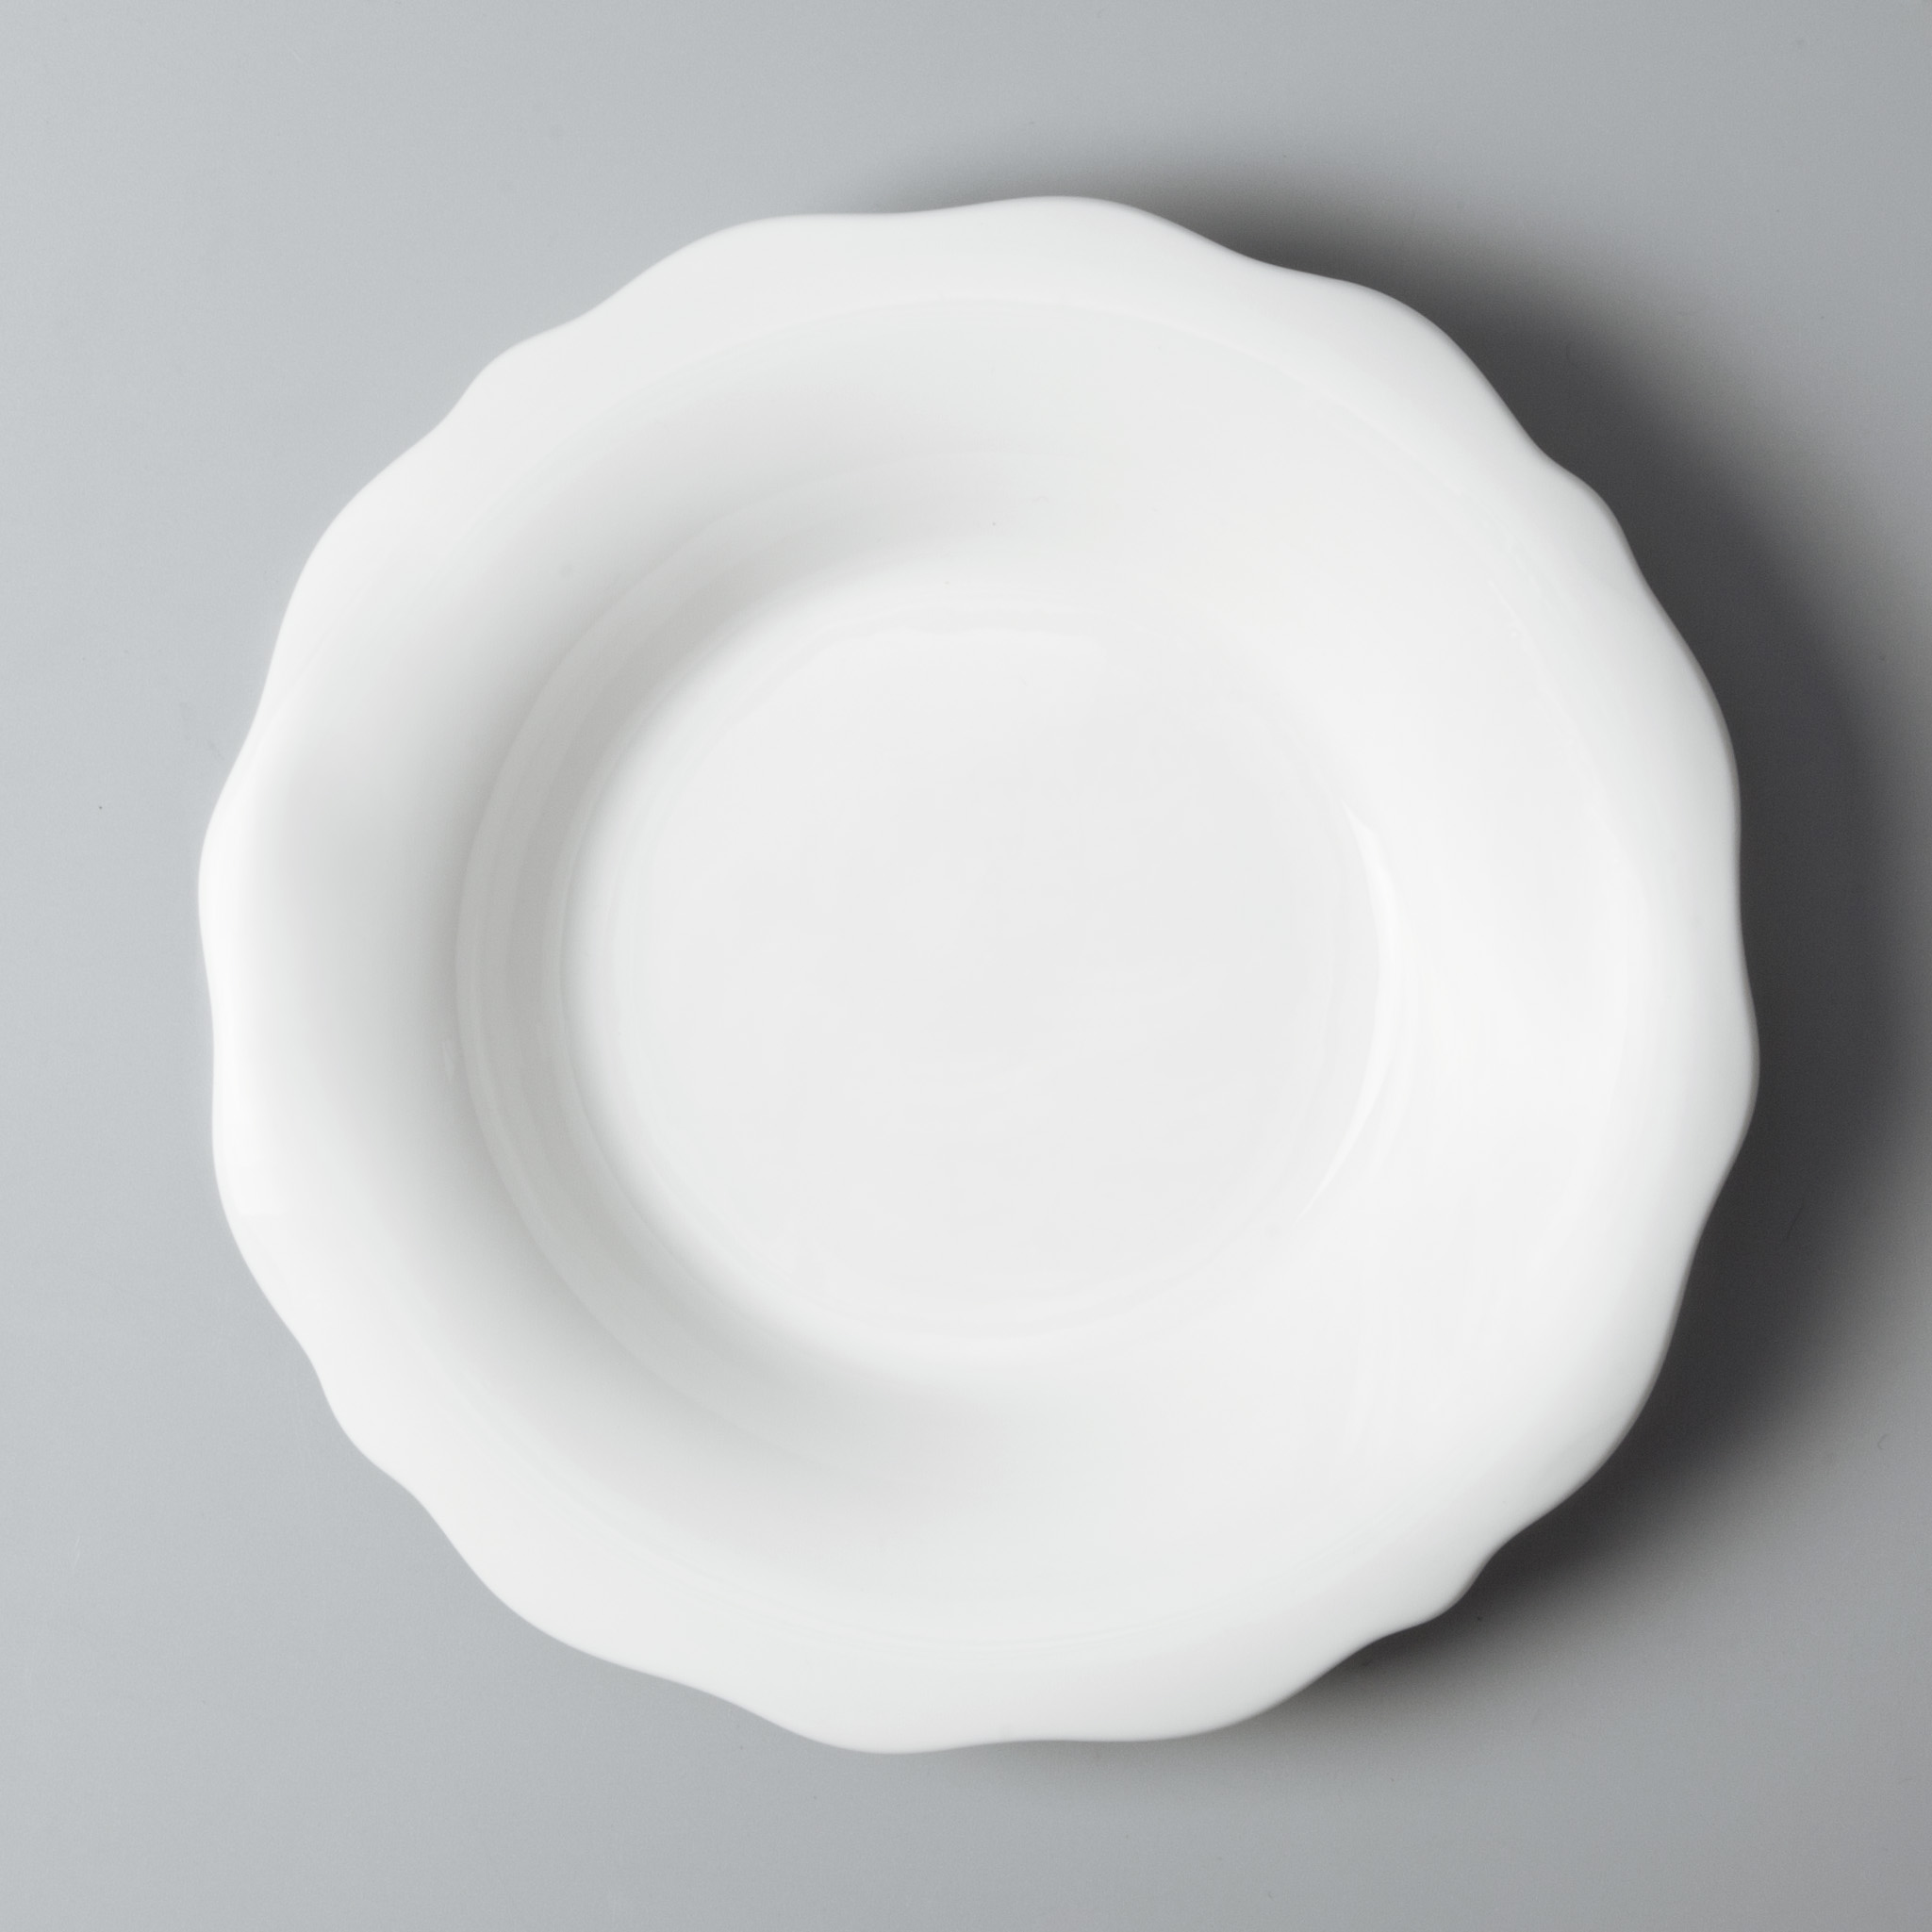 Two Eight sample white dinnerware sets for 8 series for home-3